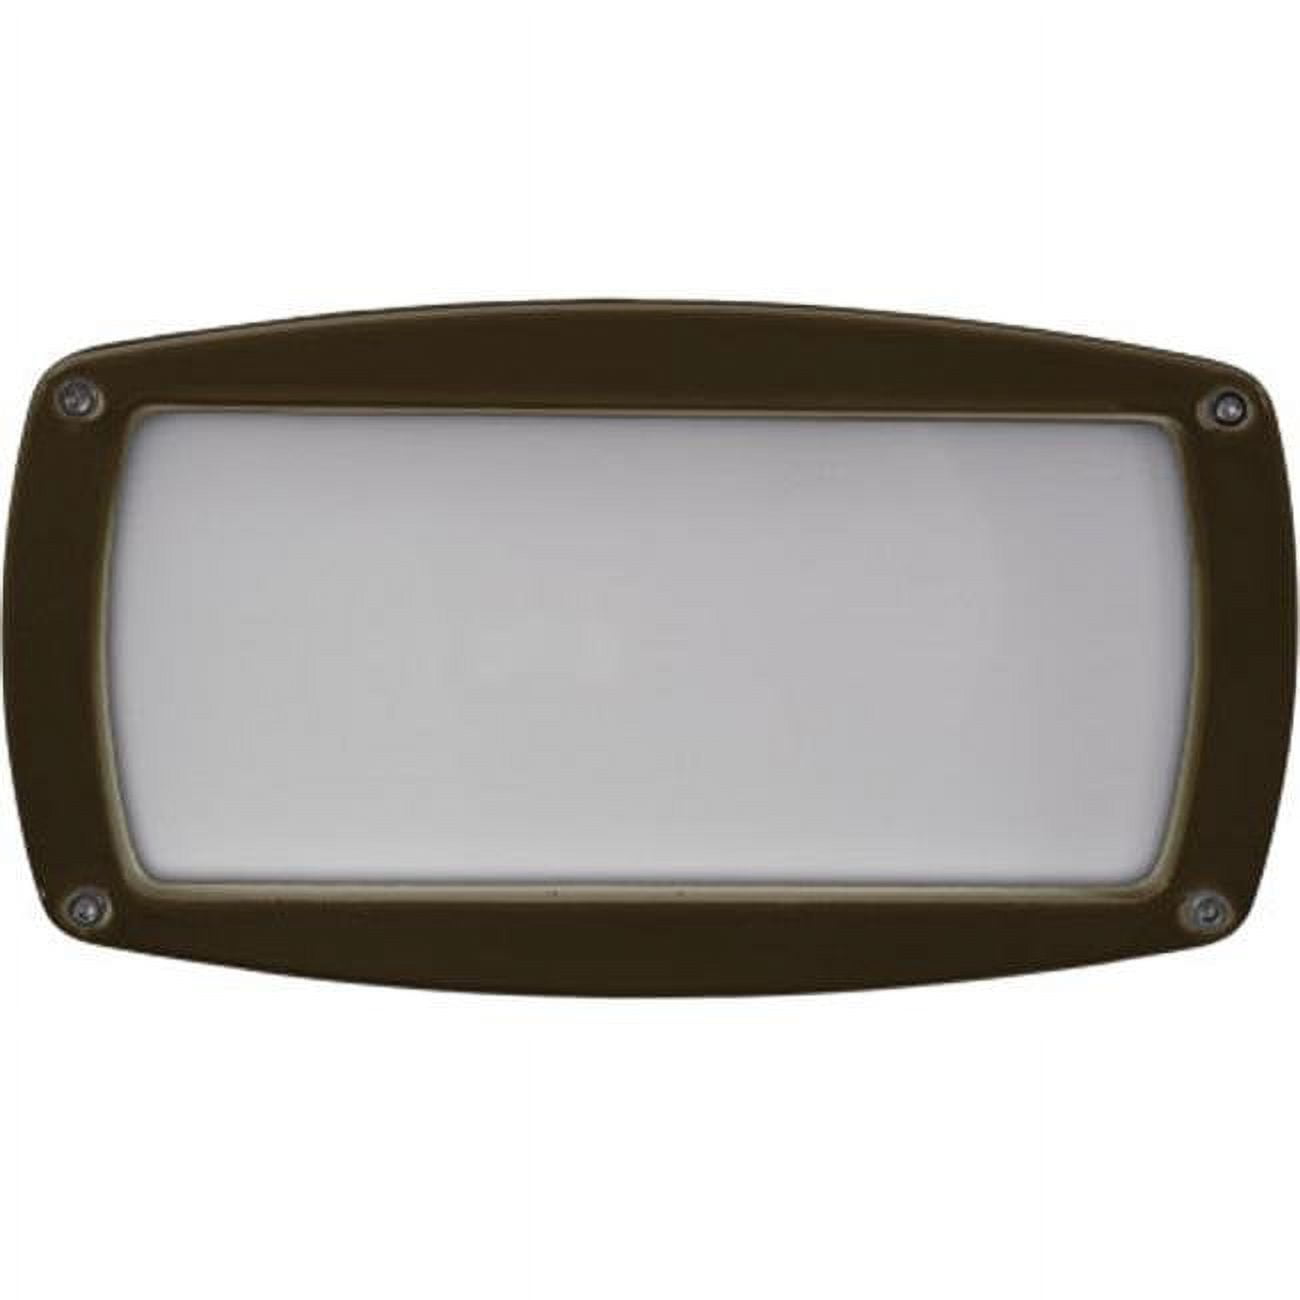 Picture of Dabmar Lighting DSL1016-BZ Recessed Open Face Brick, Step & Wall Light, Bronze - 5 x 9 x 3.90 in.